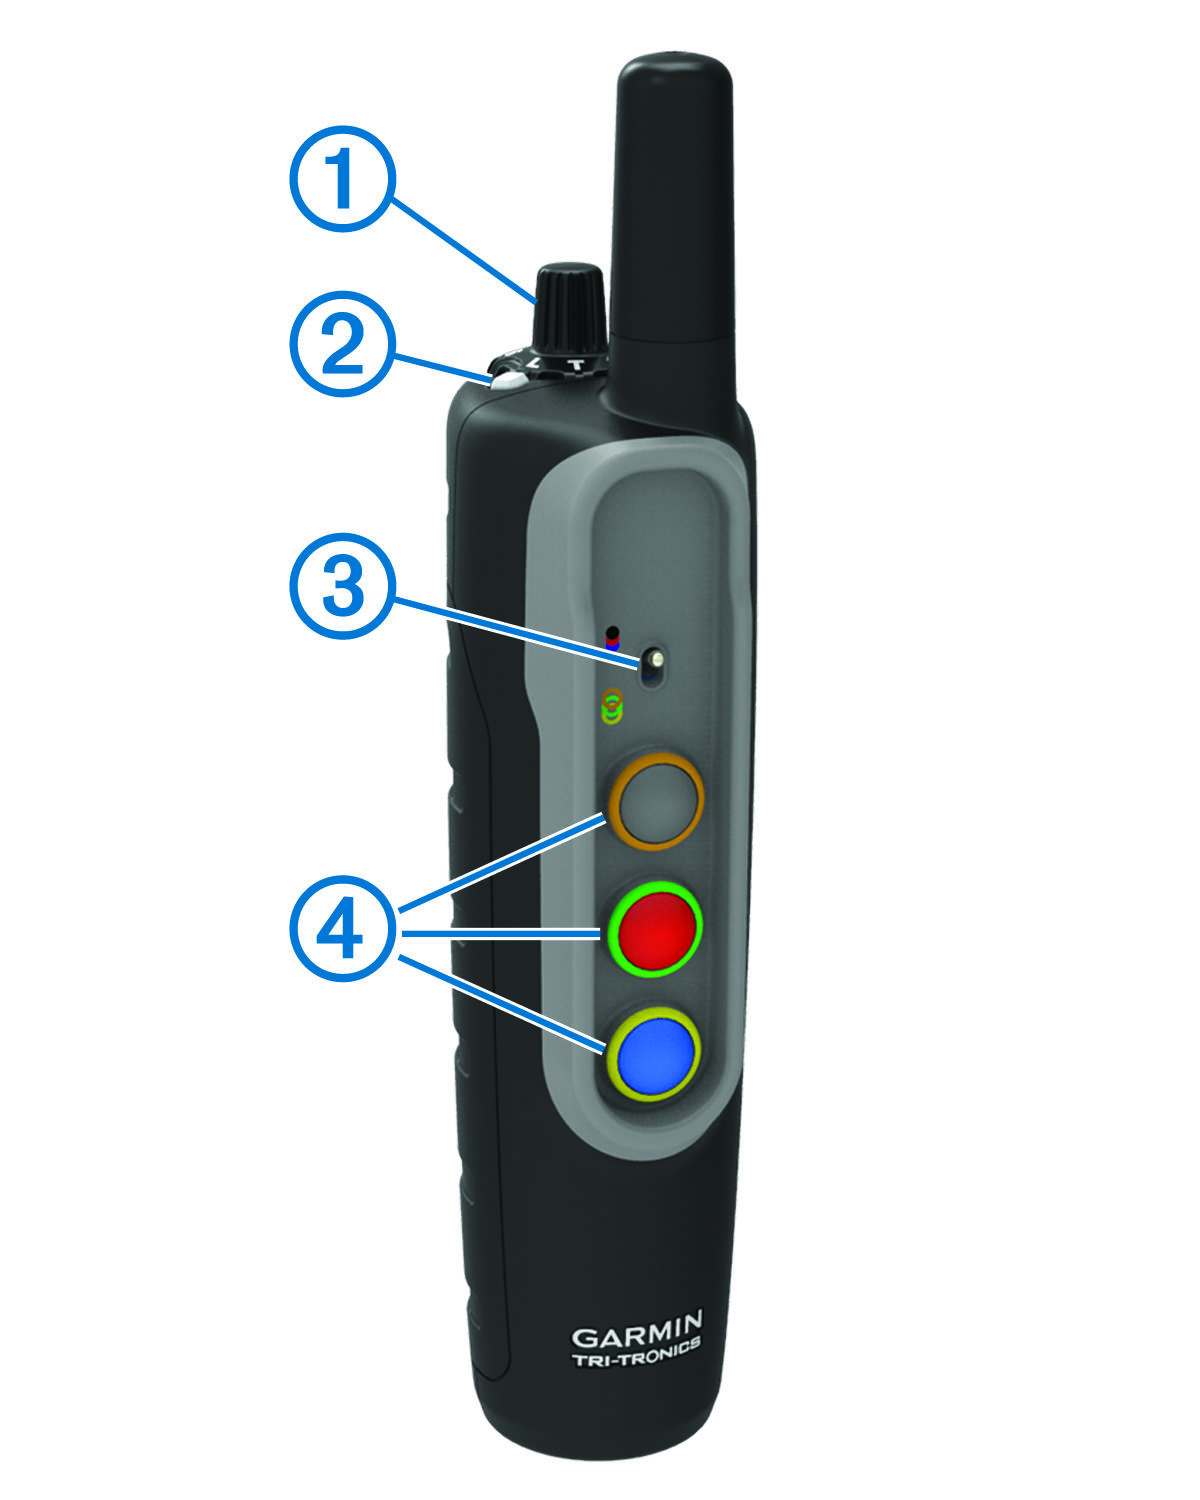 Front view of the handheld device with callouts